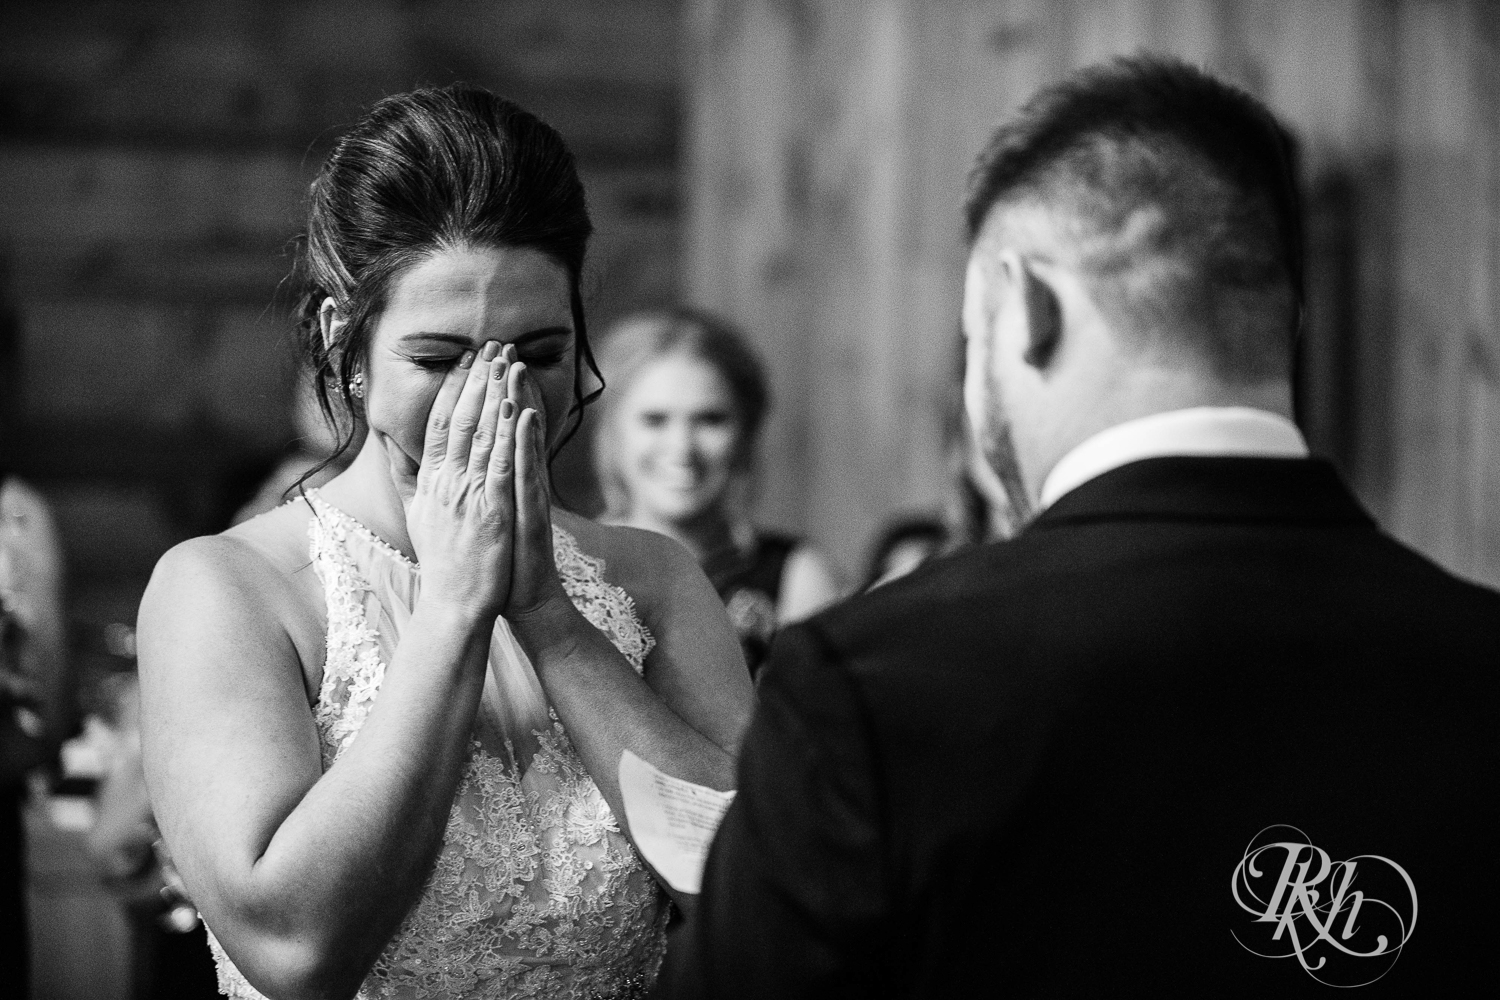 Bride and groom smile during new year's eve wedding ceremony at Creekside Farm in Rush City, Minnesota.